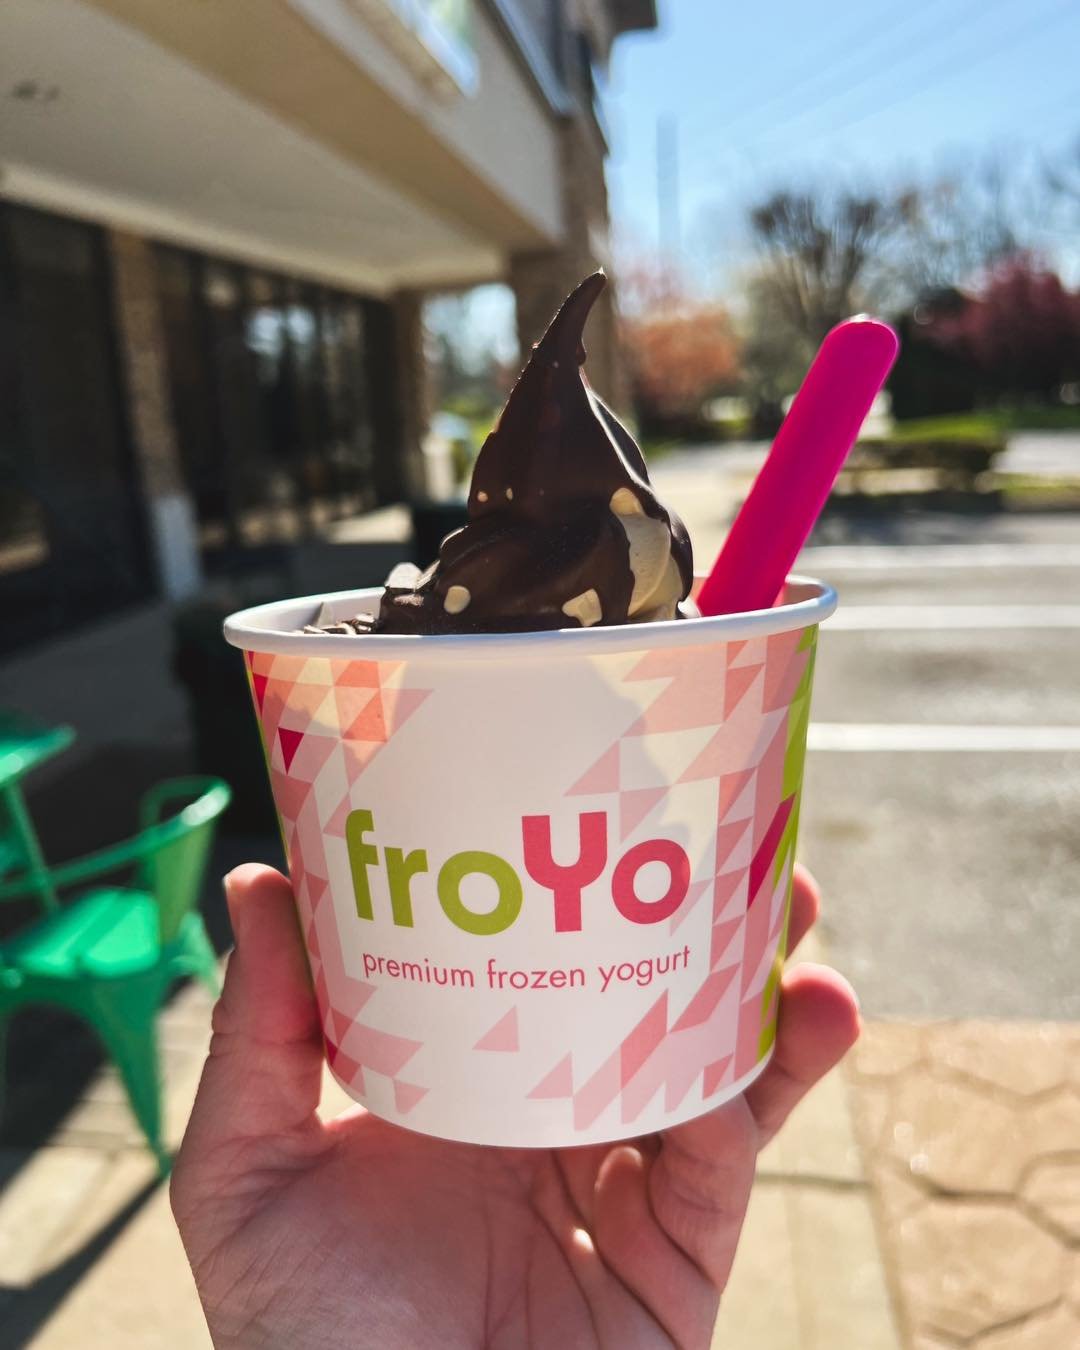 Nothing beats soaking up some sun with your favorite froyo in hand! 🌞🍦 Dive into deliciousness and savor this bright day to the fullest.

 #SunAndSwirls #FroyoWeather #SweetTreat #FroyoLovers #YogurtHeaven #SunnyDays #ChillAndRelax #FroyoSTL